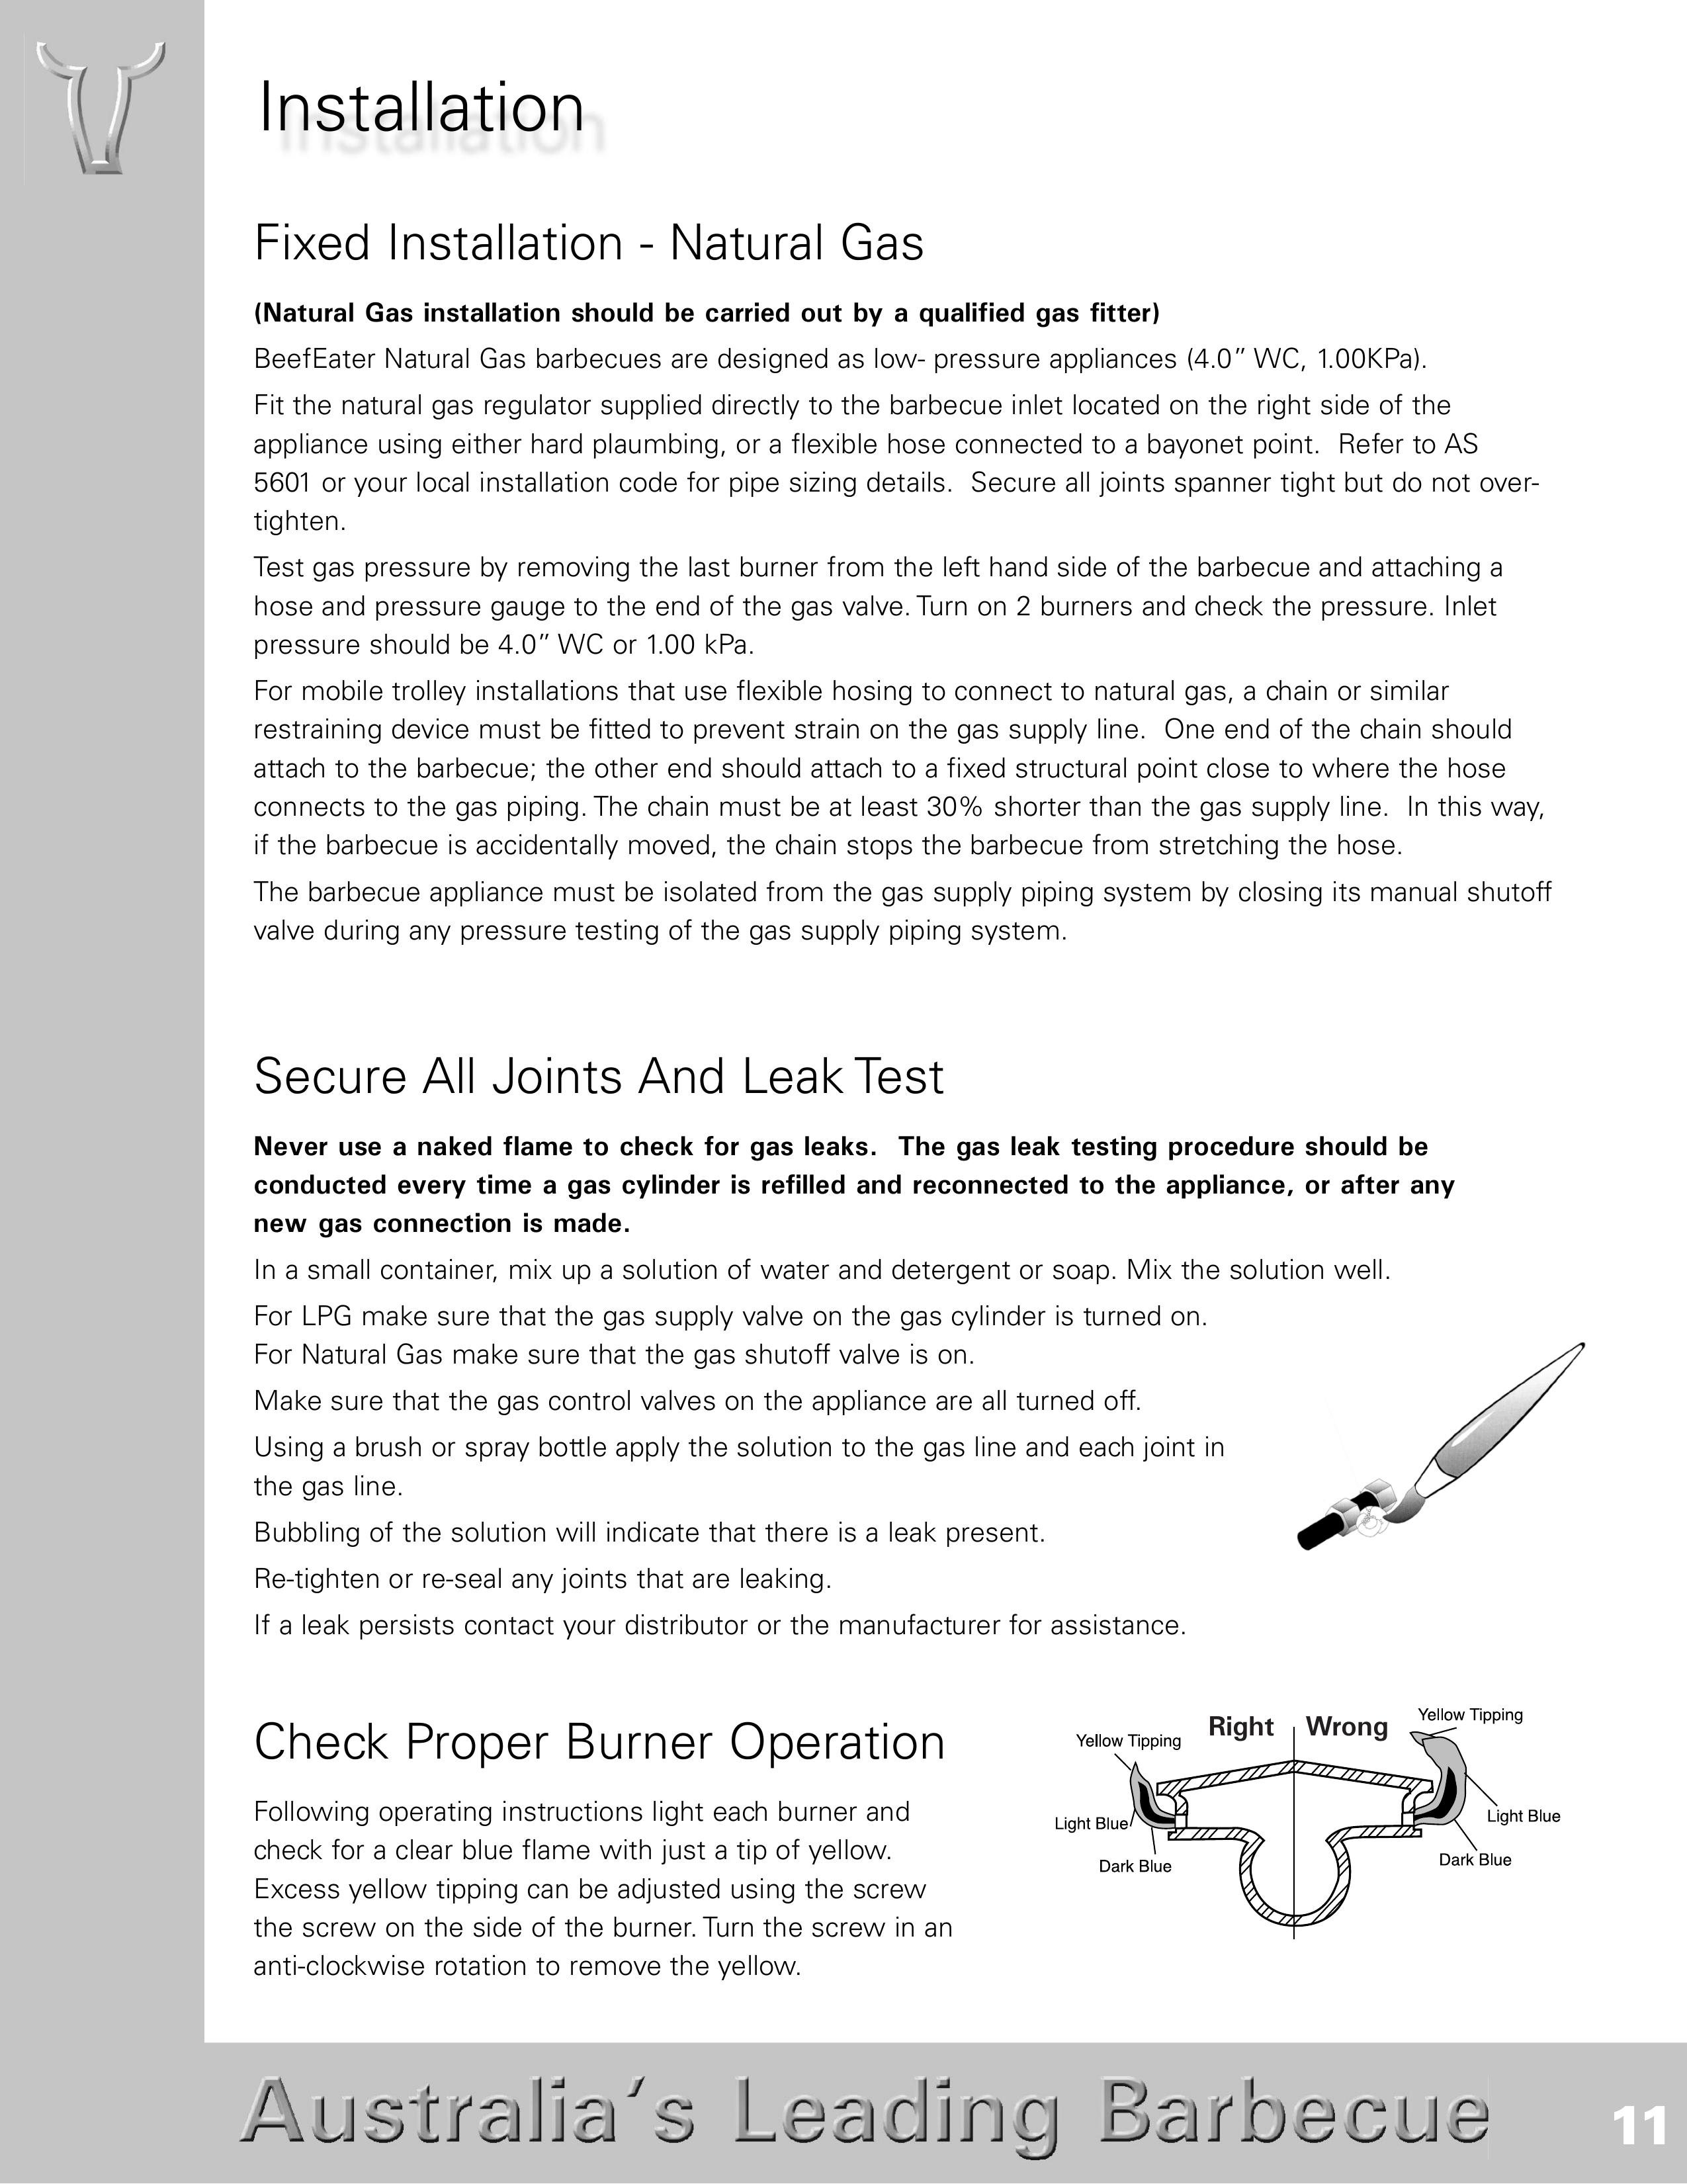 BeefEater SL4000s Charcoal Grill User Manual (Page 11)